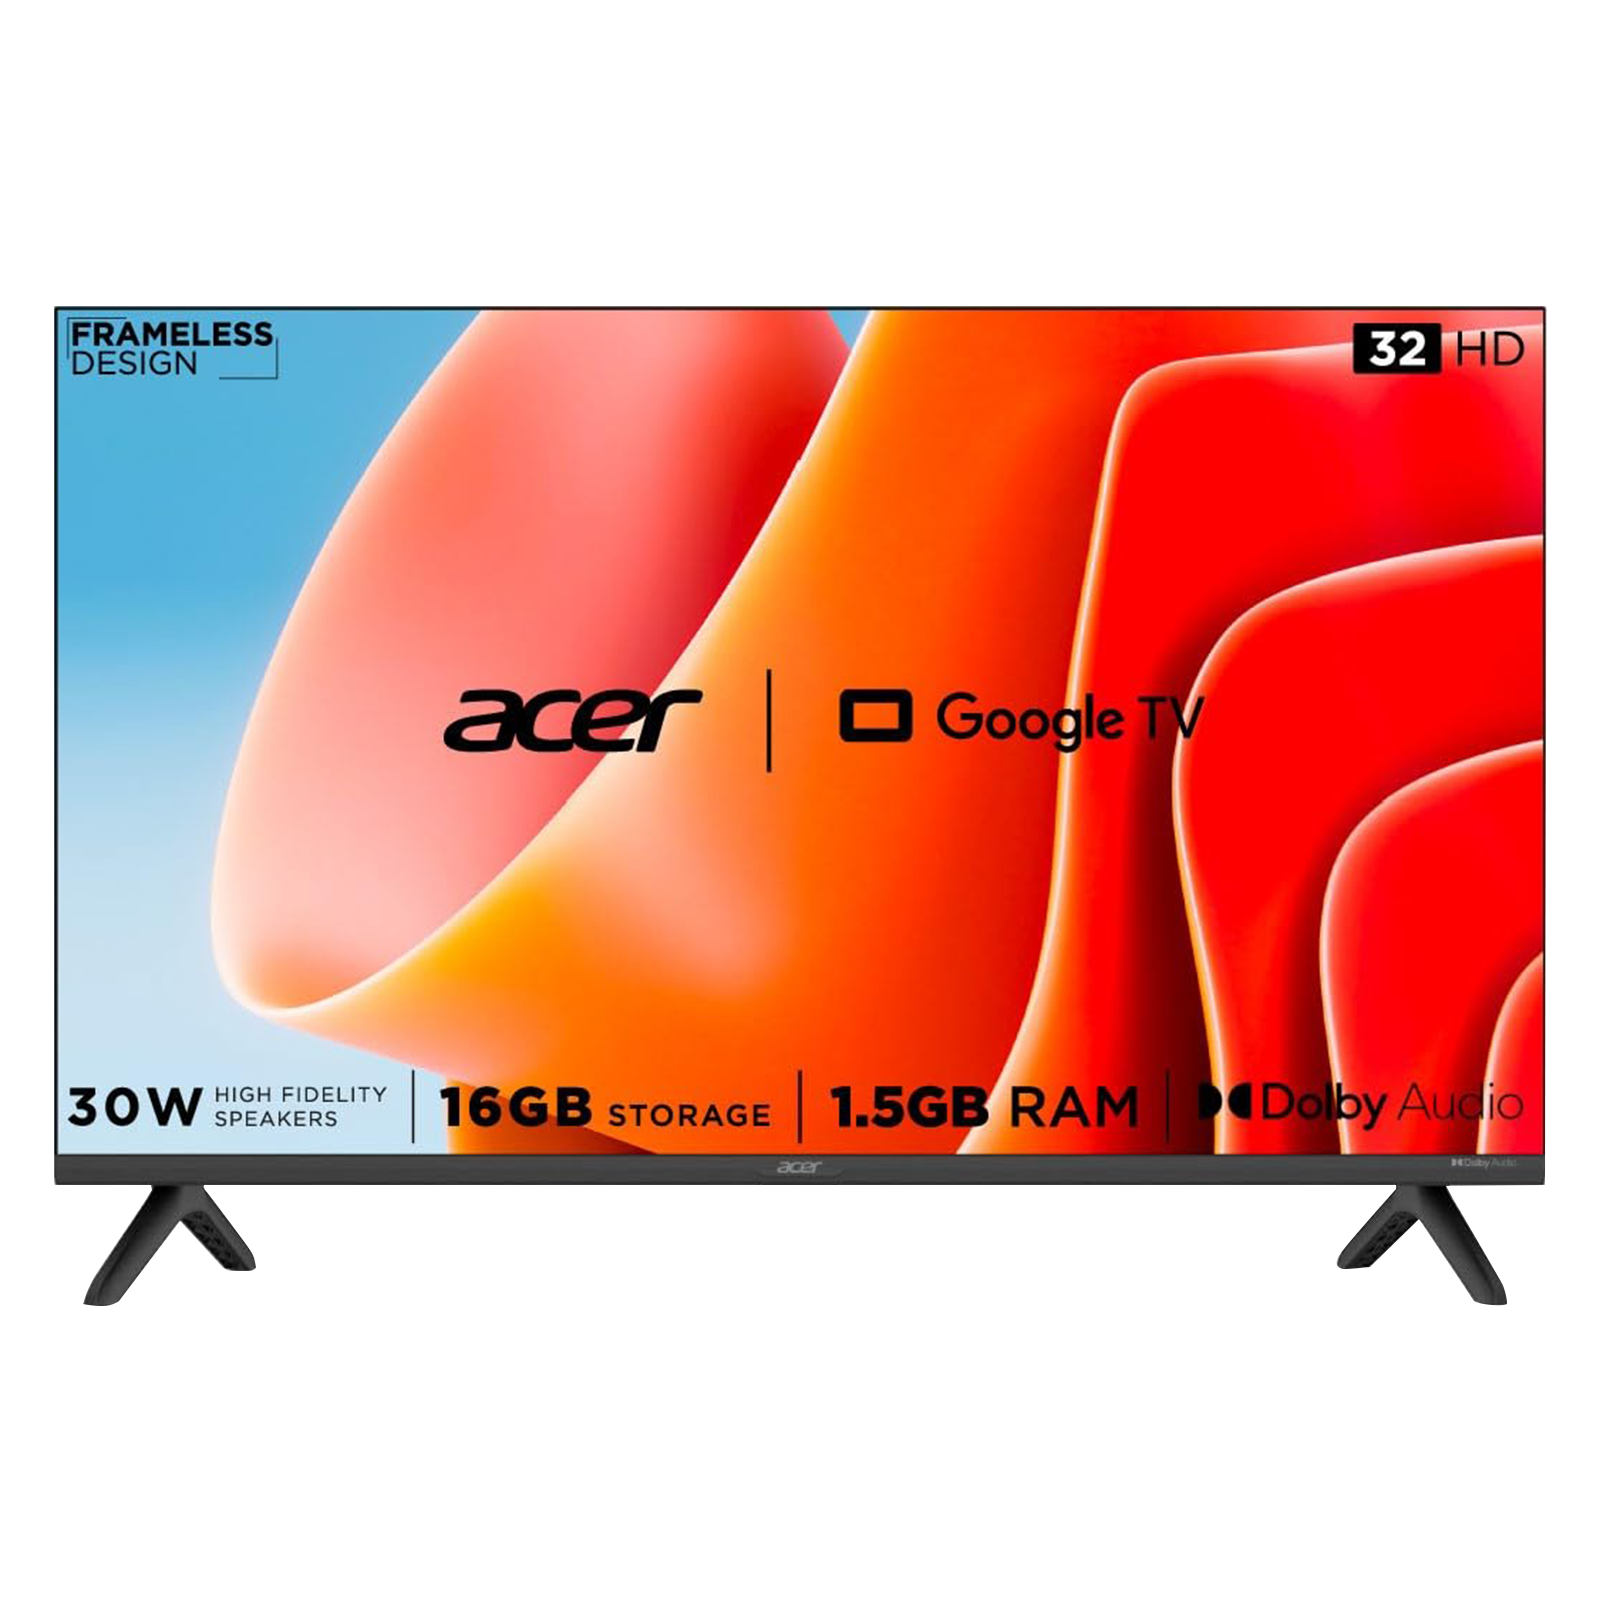 SAMSUNG 80 cm (32 inch) HD Ready LED TV Online at best Prices In India